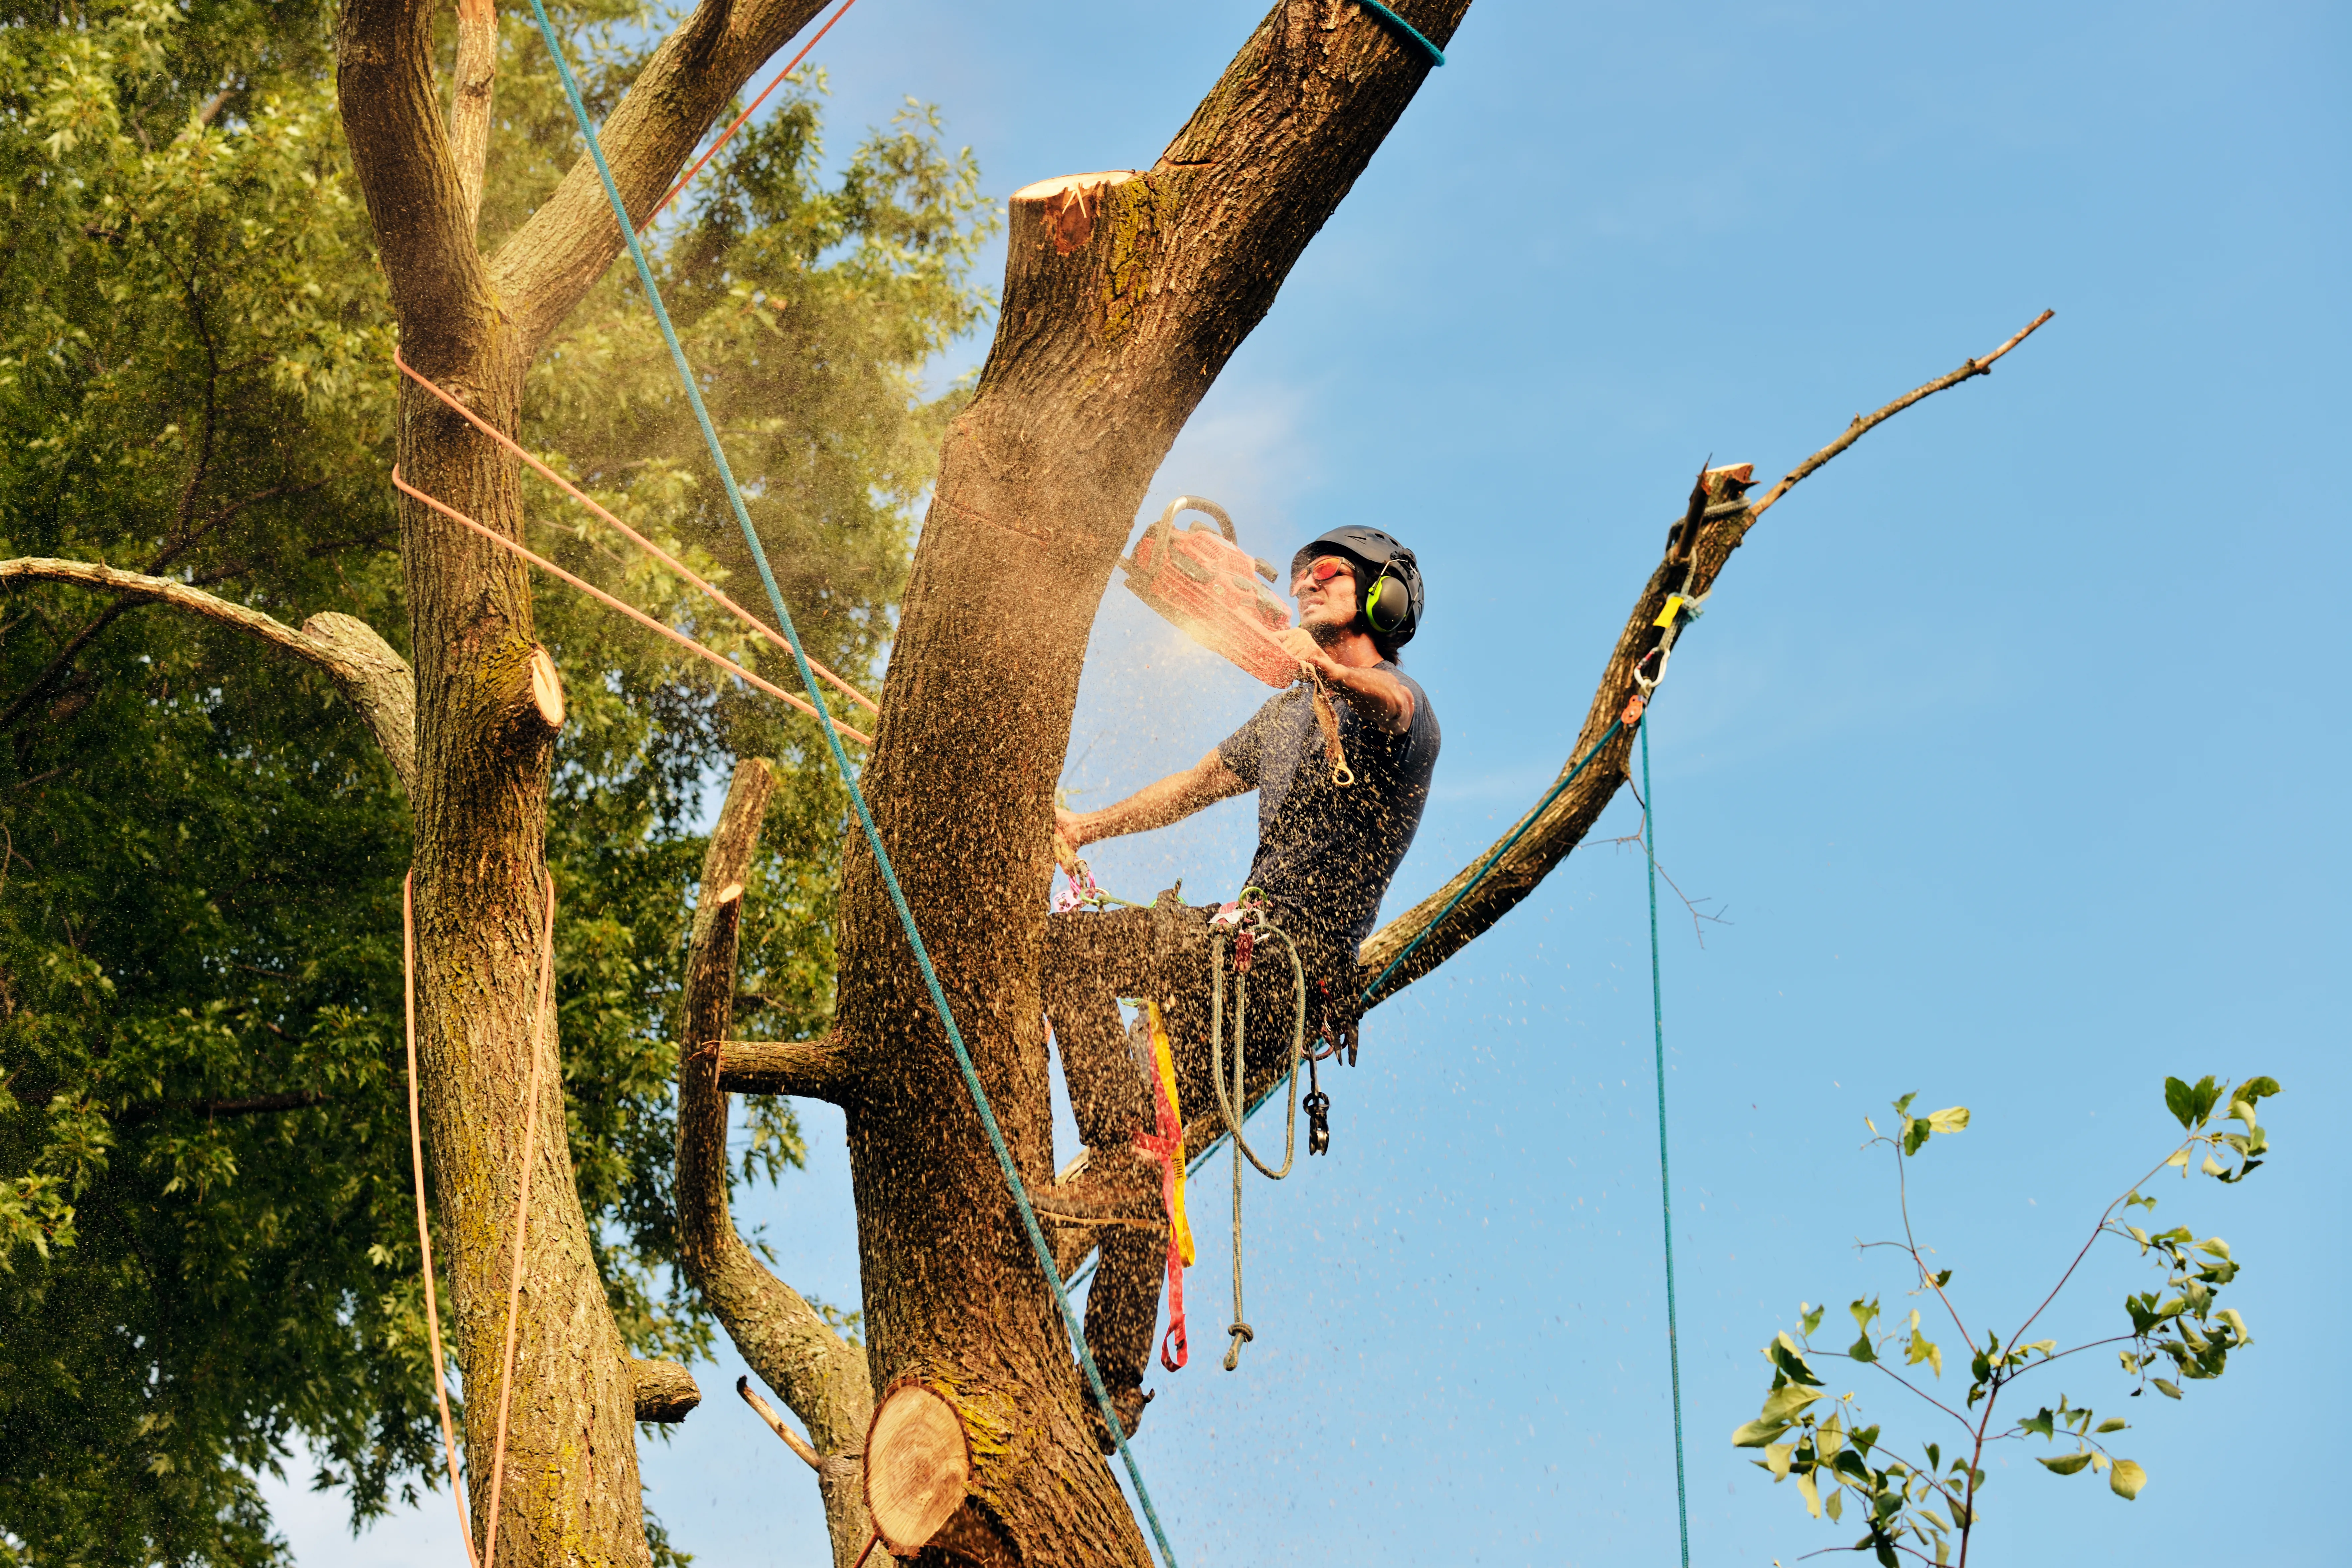 Reputable Tree Removal Service Companies In The United States